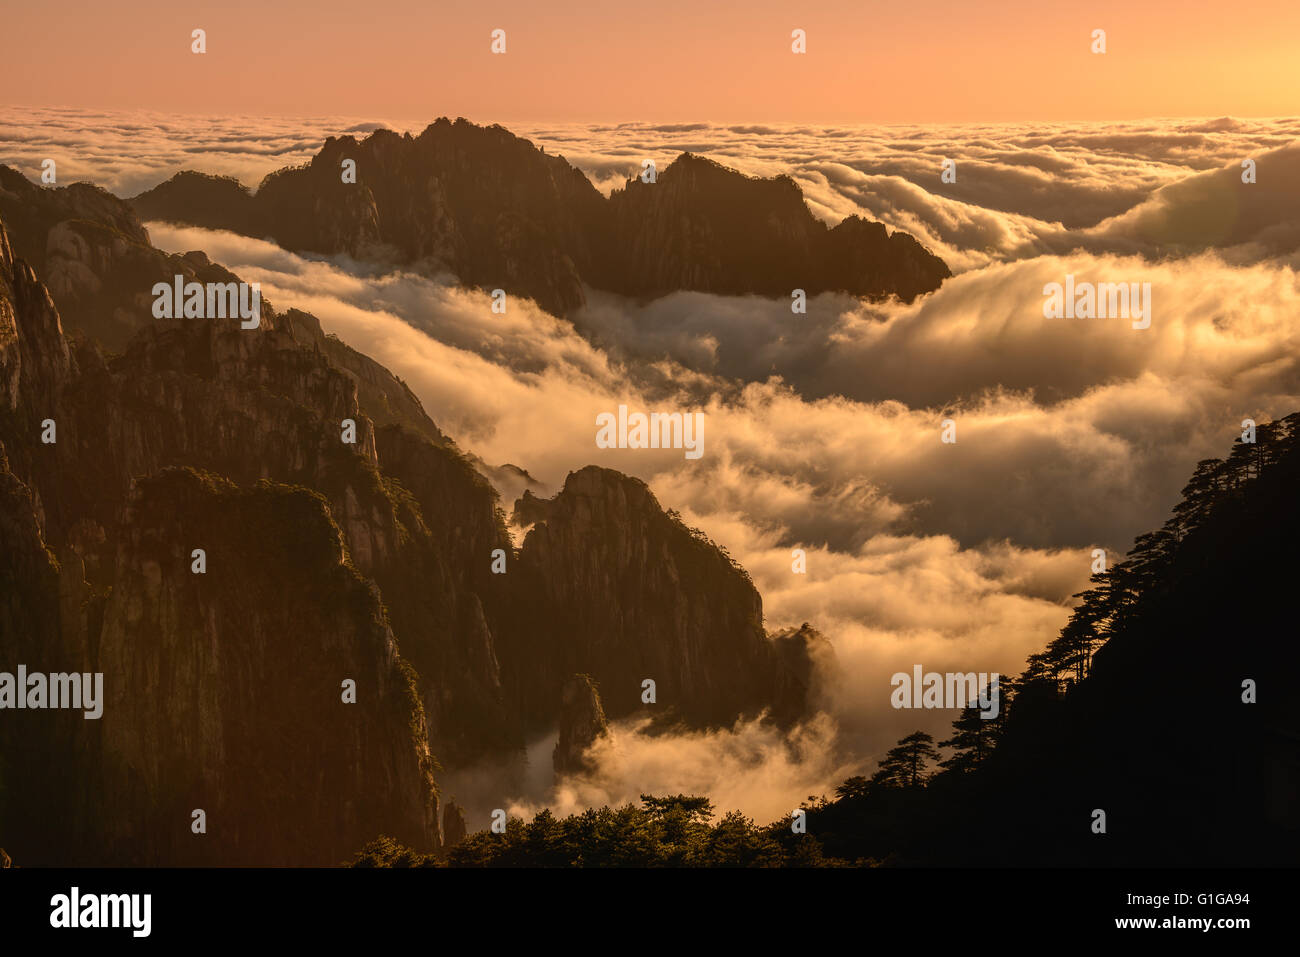 Above the clouds at sunset on Huangshan mountain in Anhui province, China Stock Photo